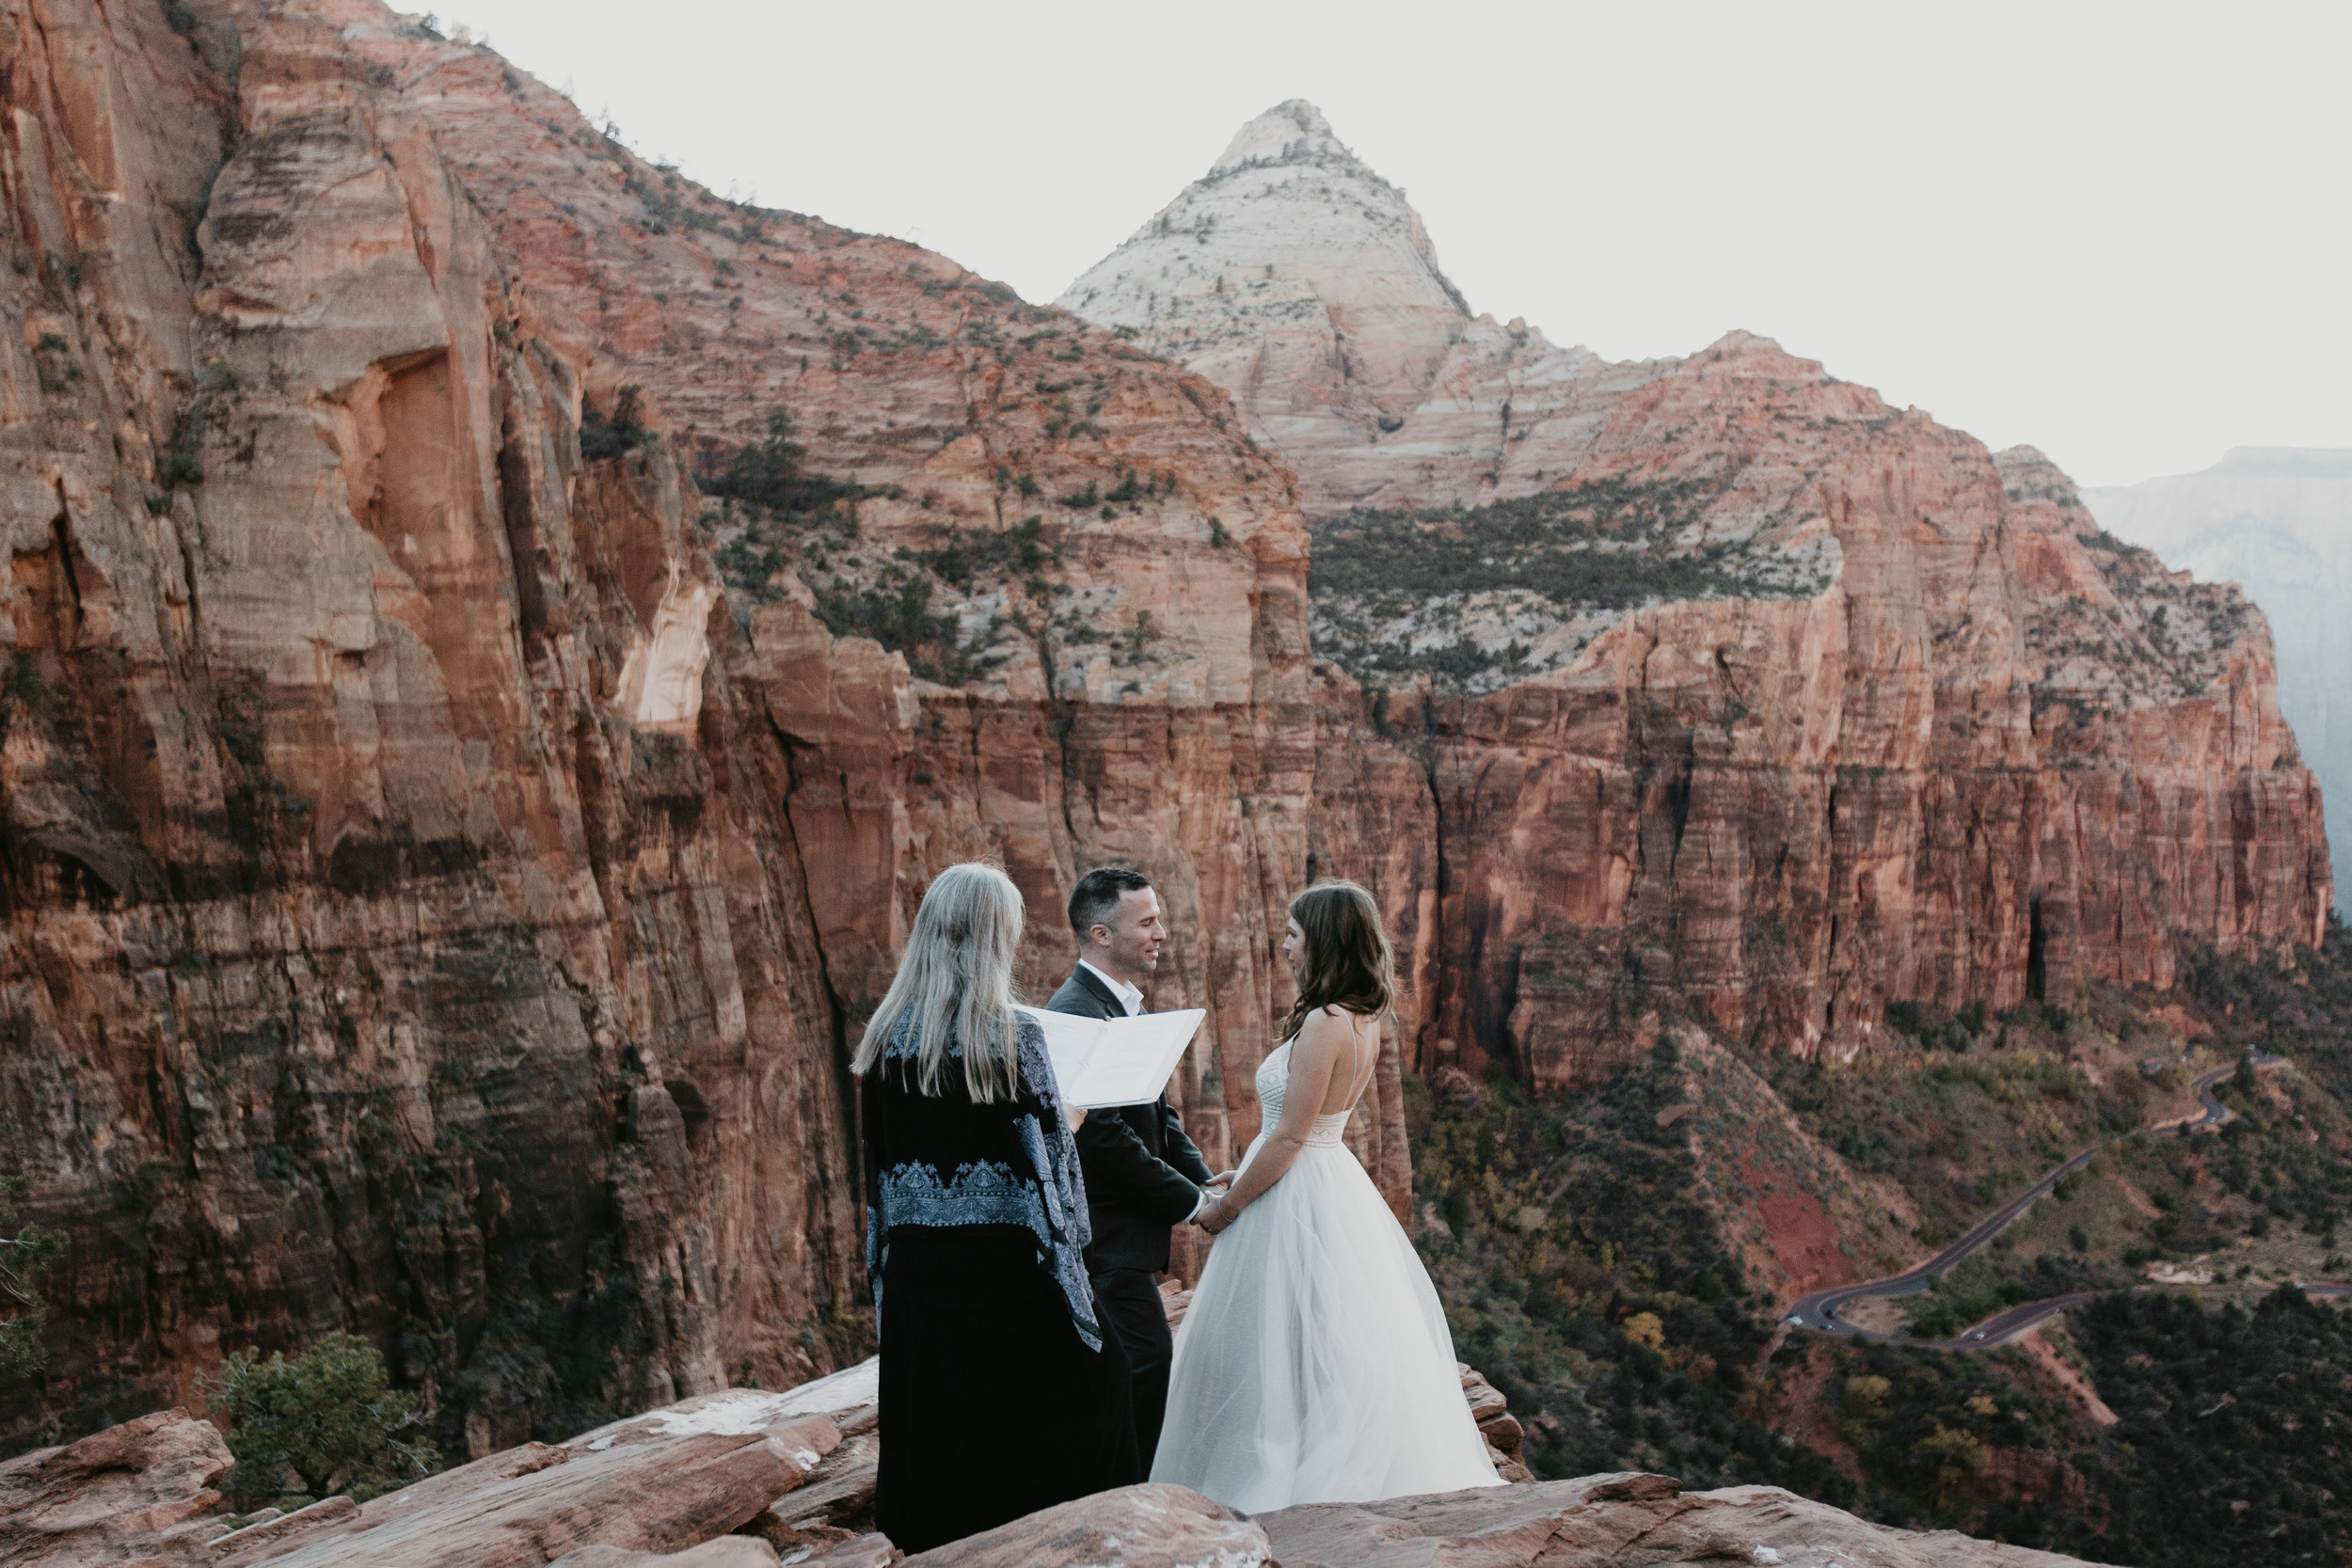 nicole-daacke-photography-zion-national-park-elopement-photographer-canyon-overlook-trail-elope-hiking-adventure-wedding-photos-fall-utah-red-rock-canyon-stgeorge-eloping-photographer-46.jpg